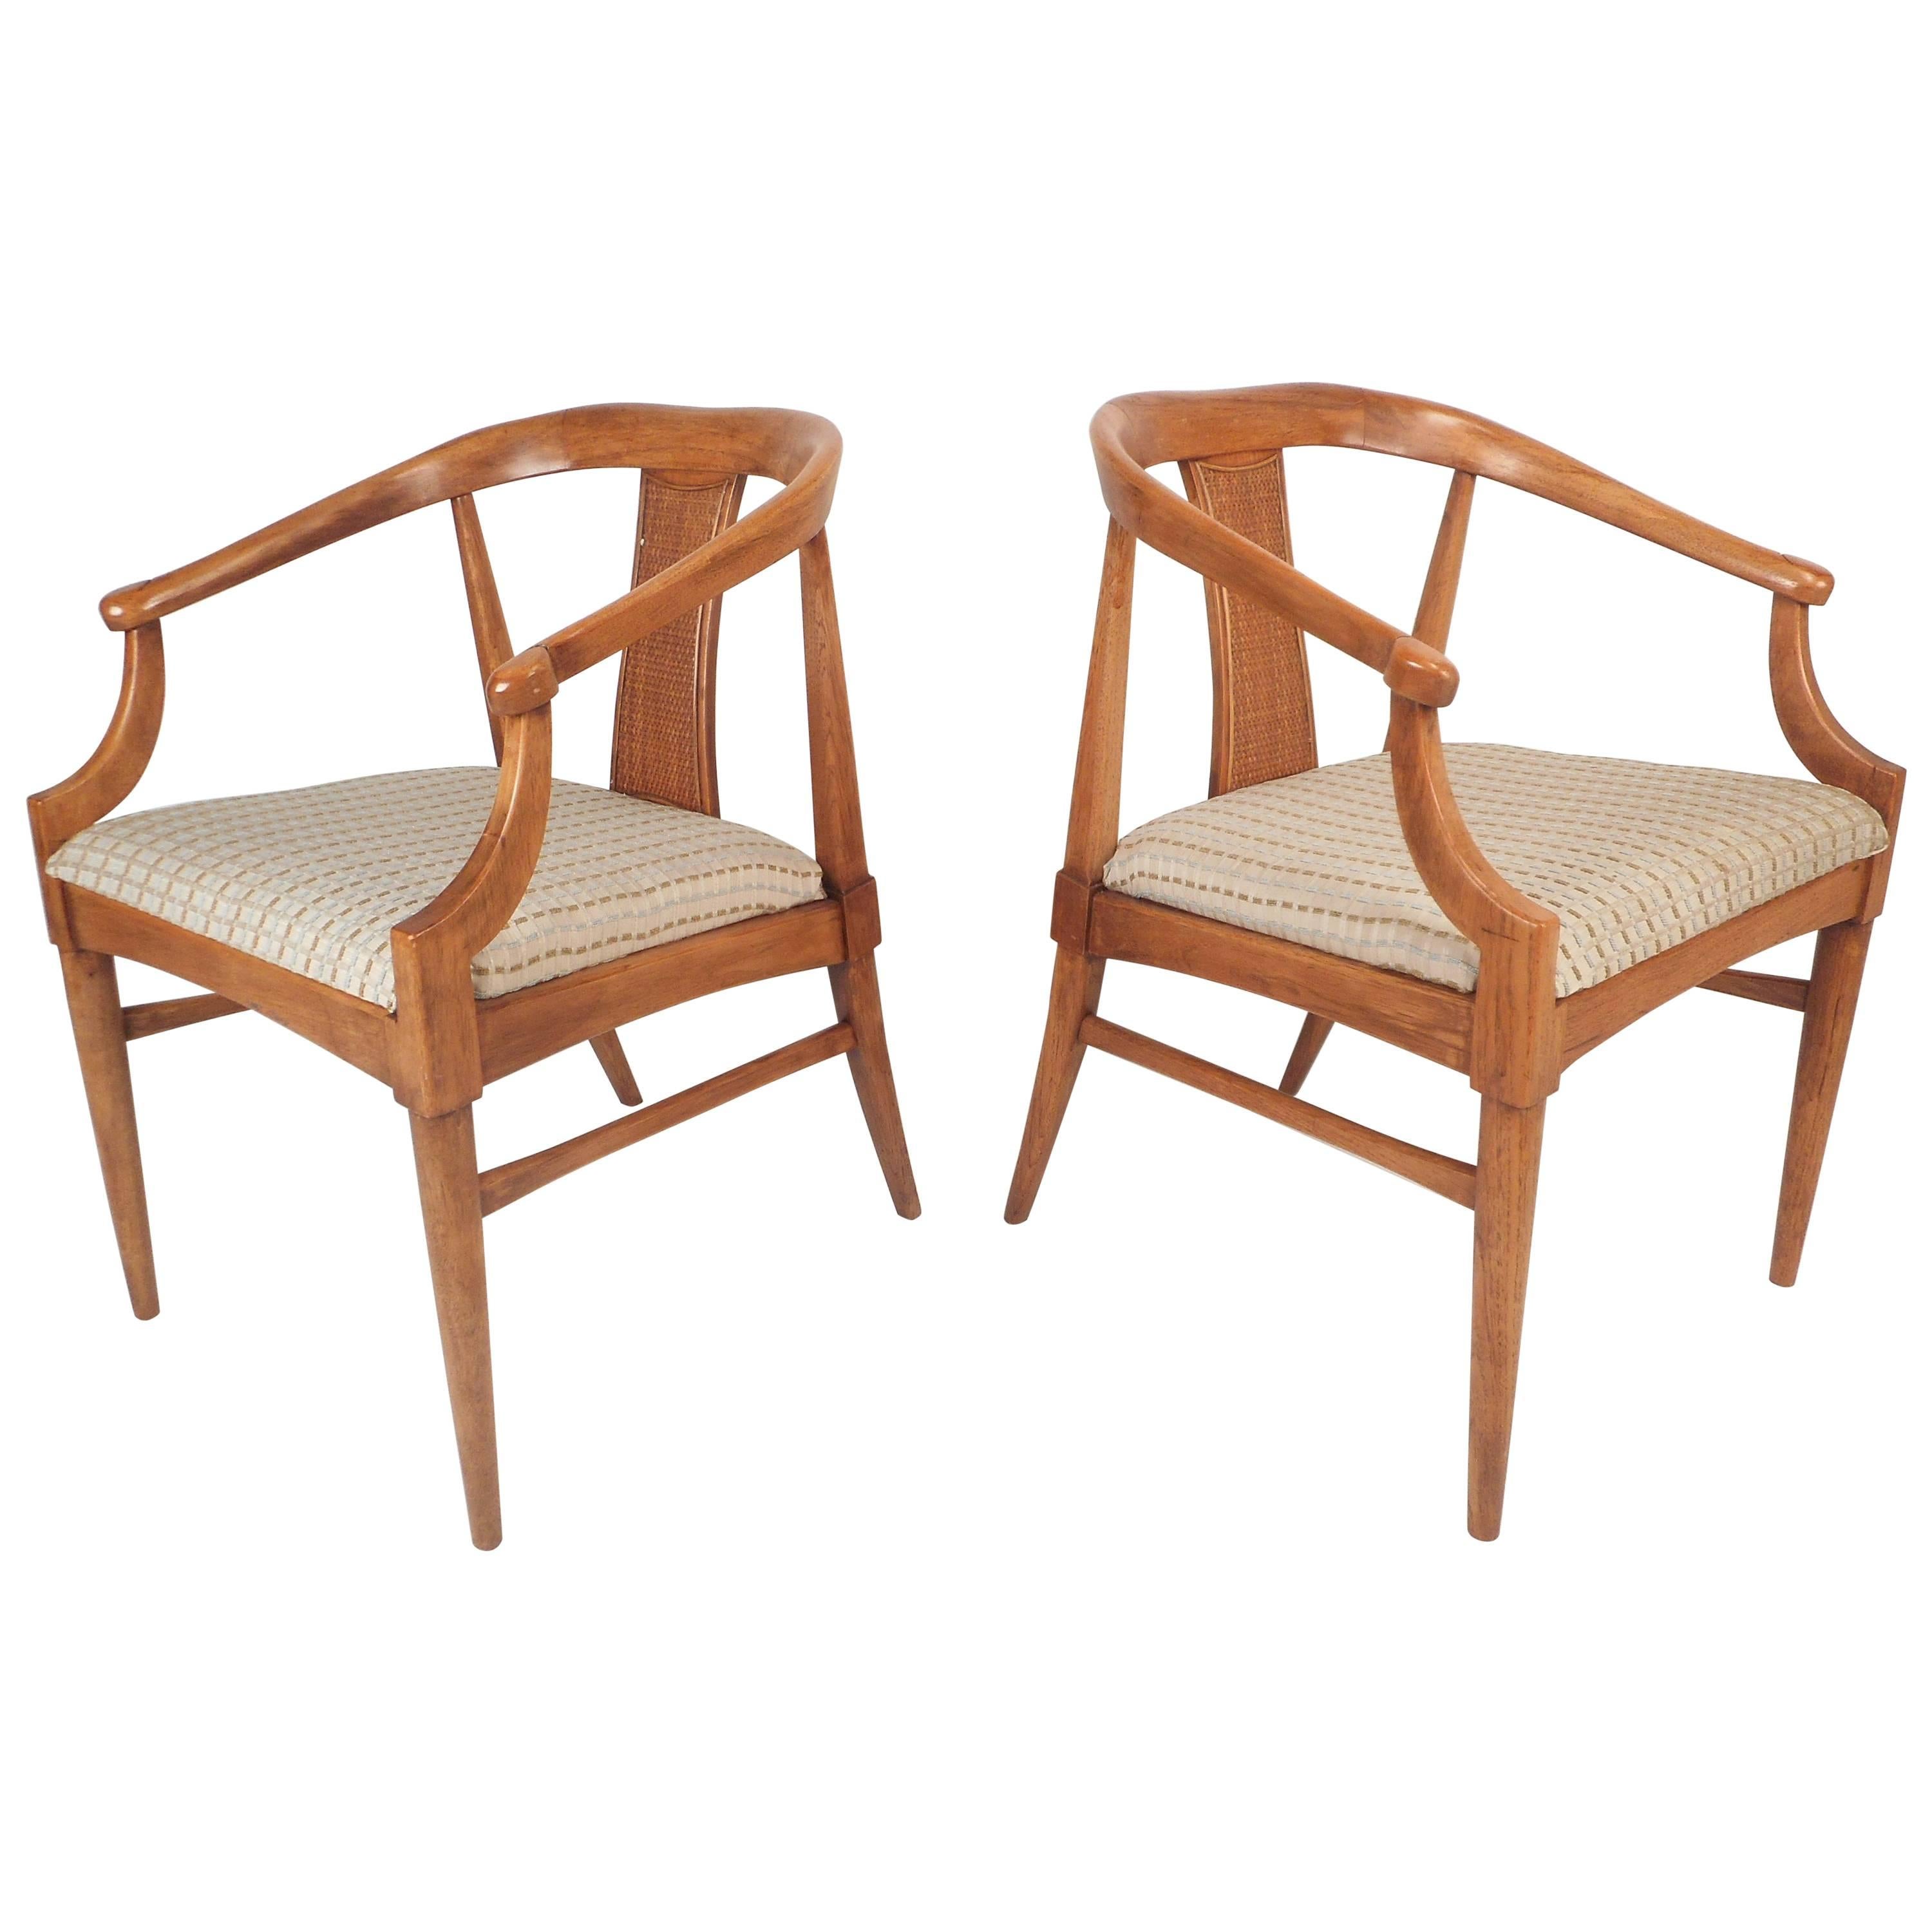 Pair of Mid-Century Modern Side Chairs